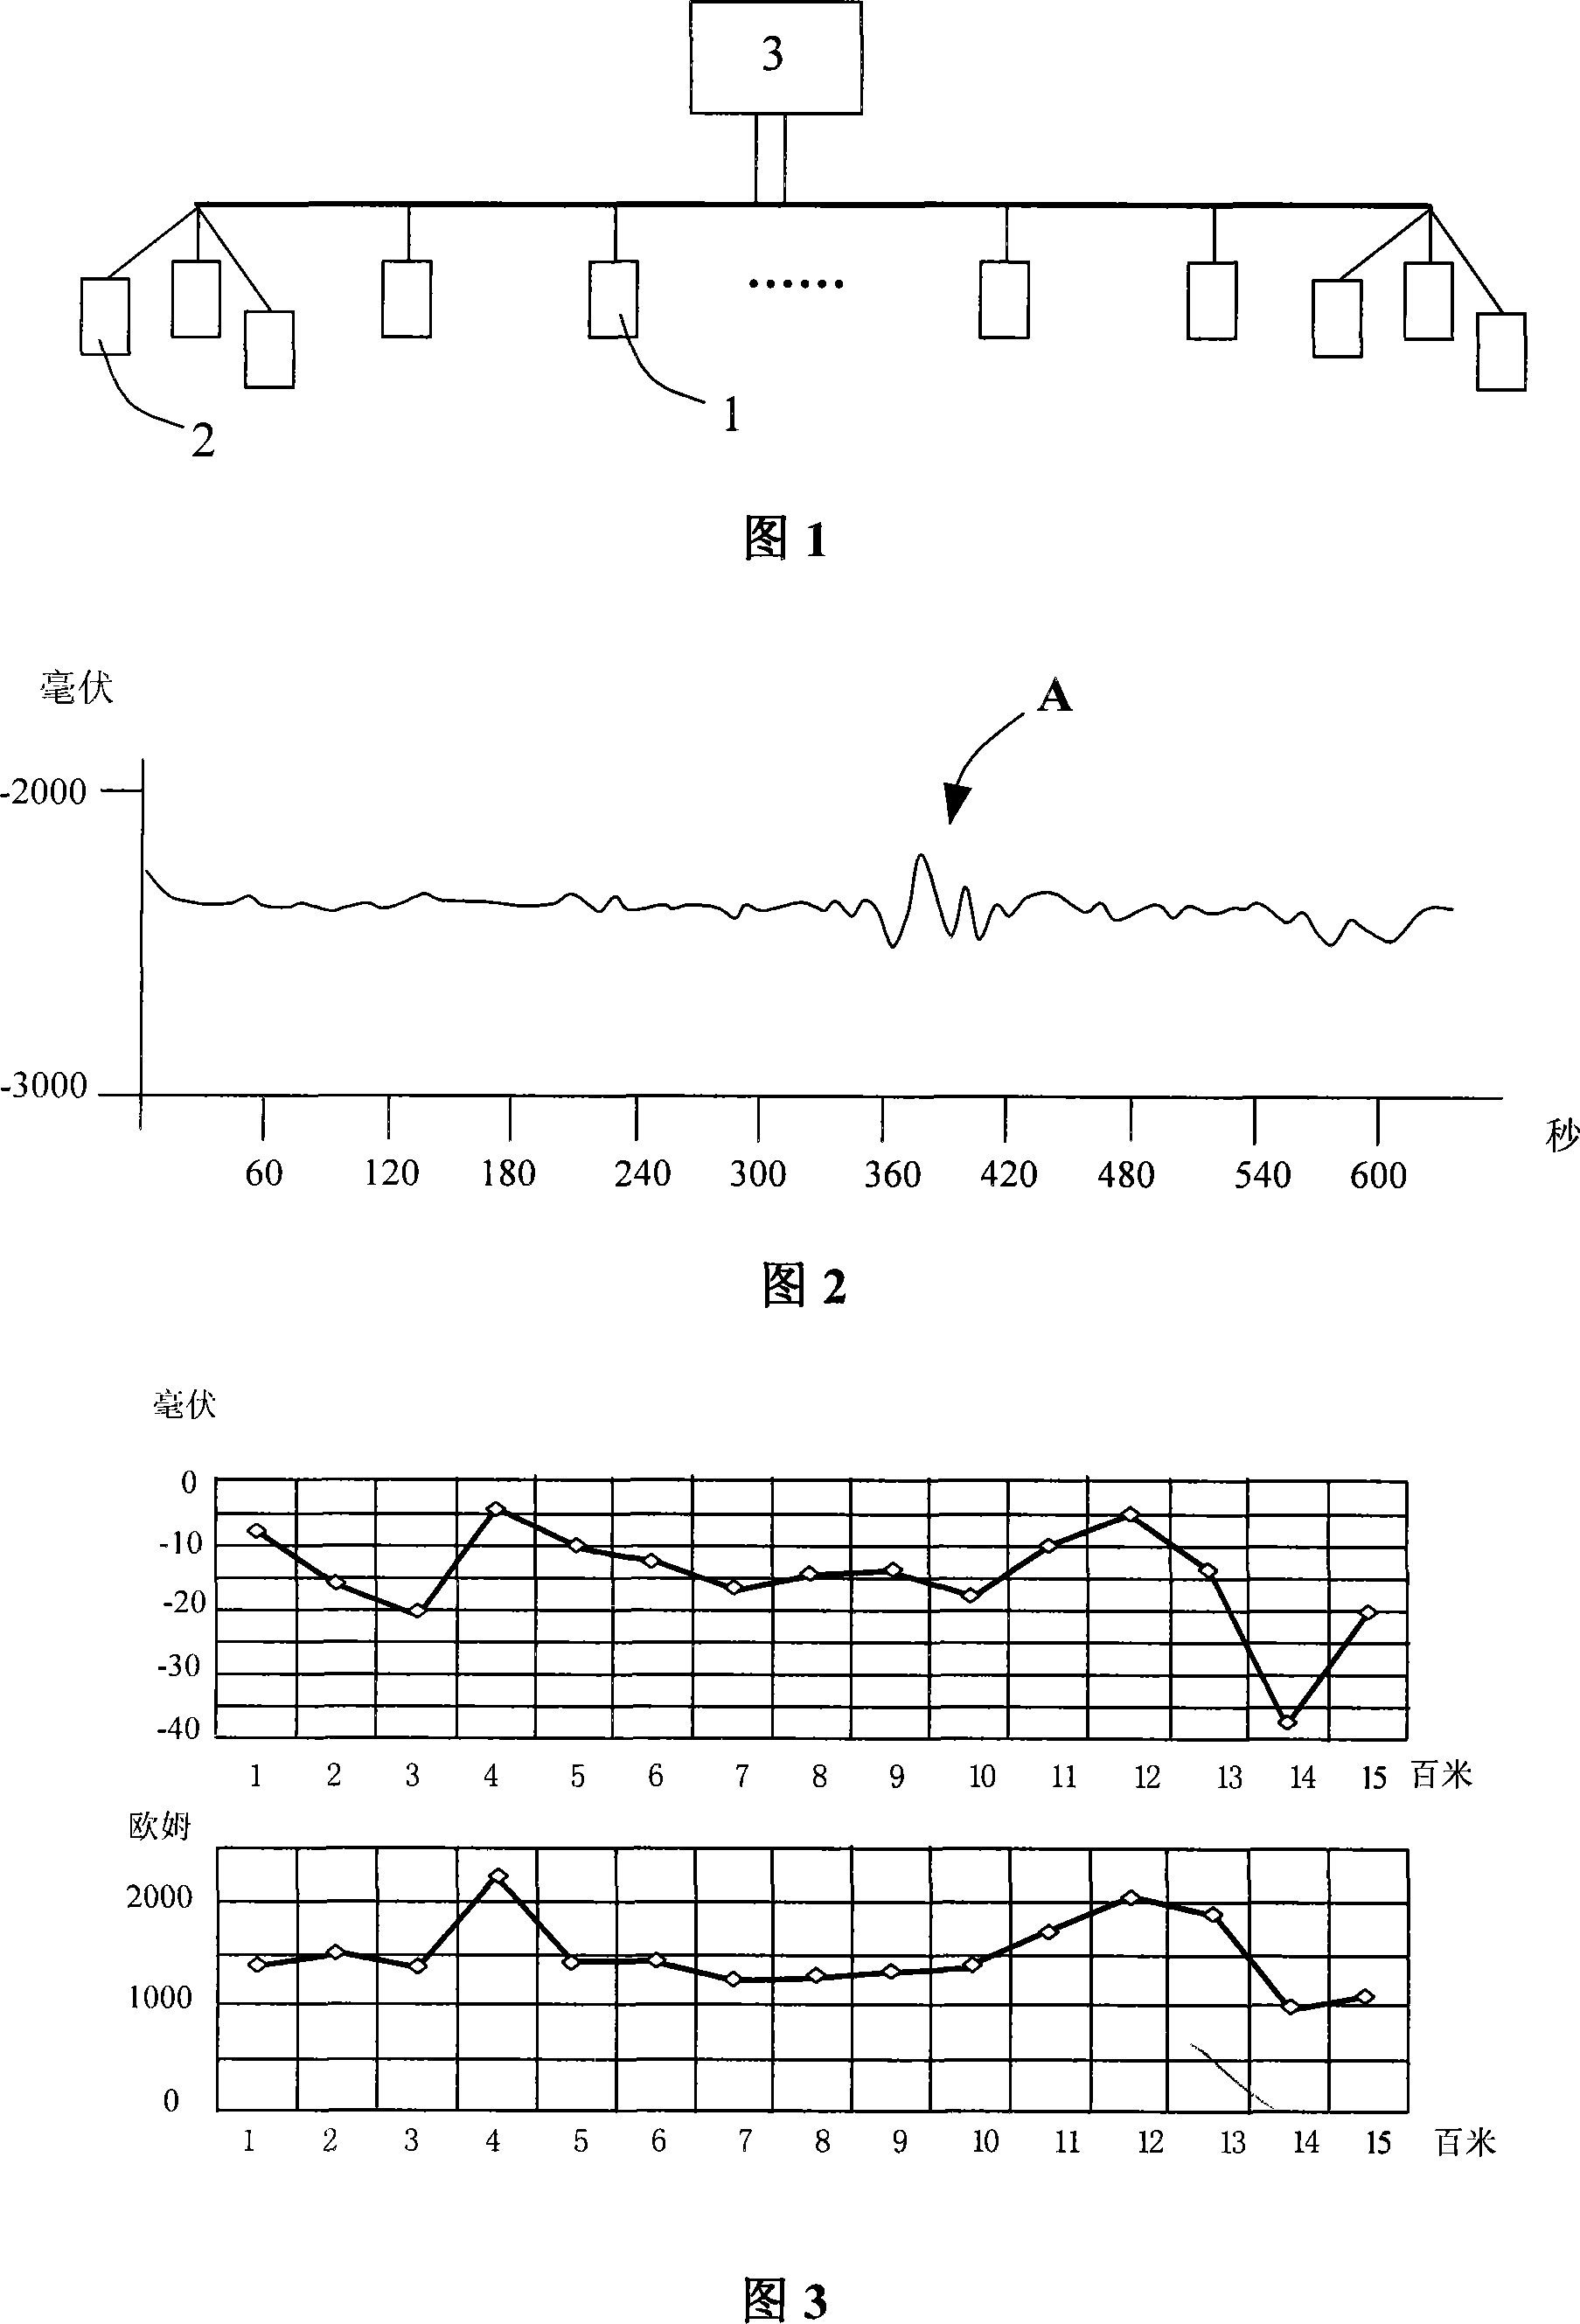 Natural potential continuous section exploration method